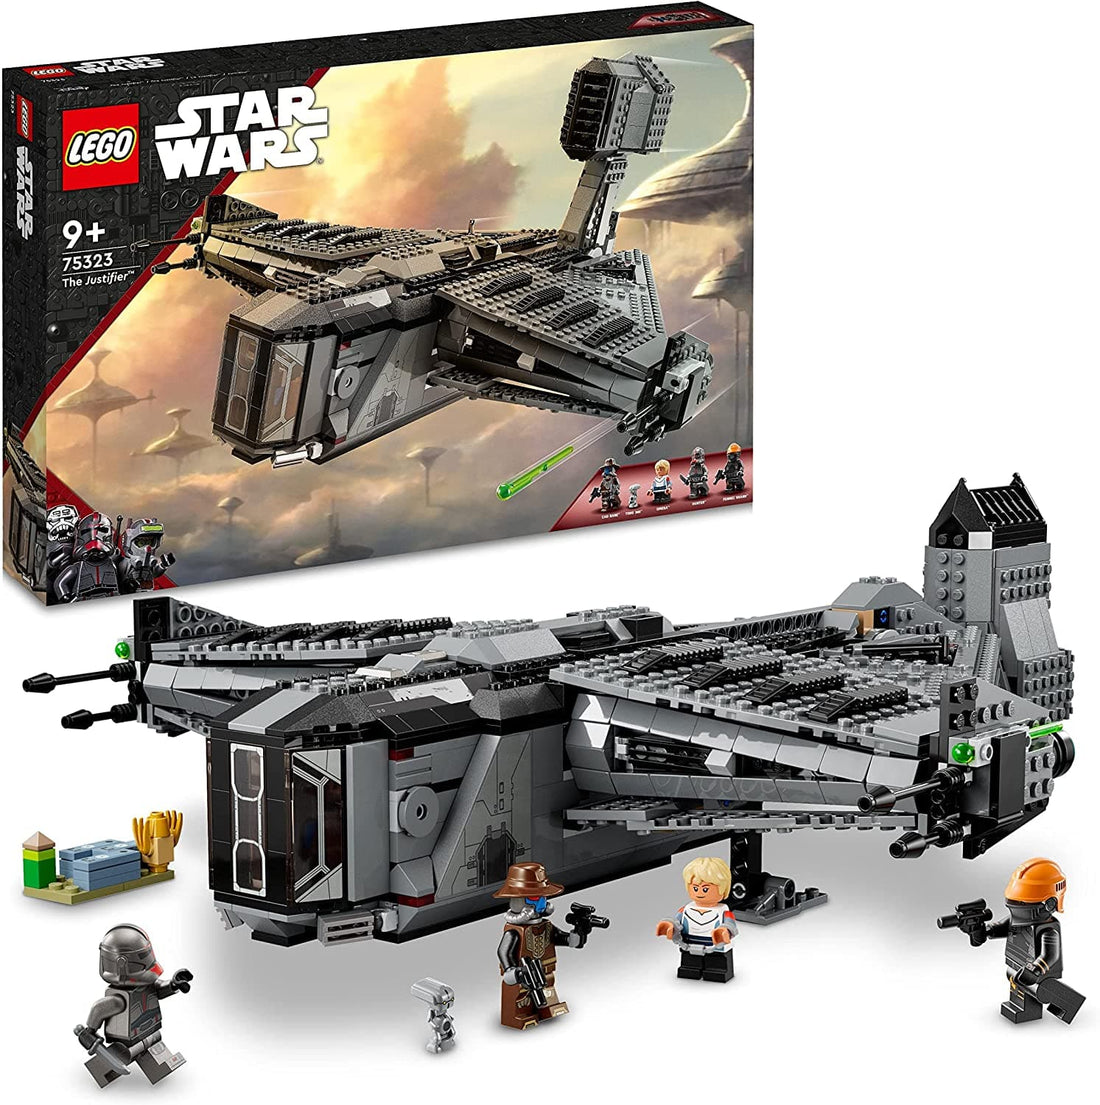 LEGO Star Wars The Justifier Buildable Toy Starship with Cad Bane Minifigure and Todo 360 Droid Figure, The Bad Batch Set